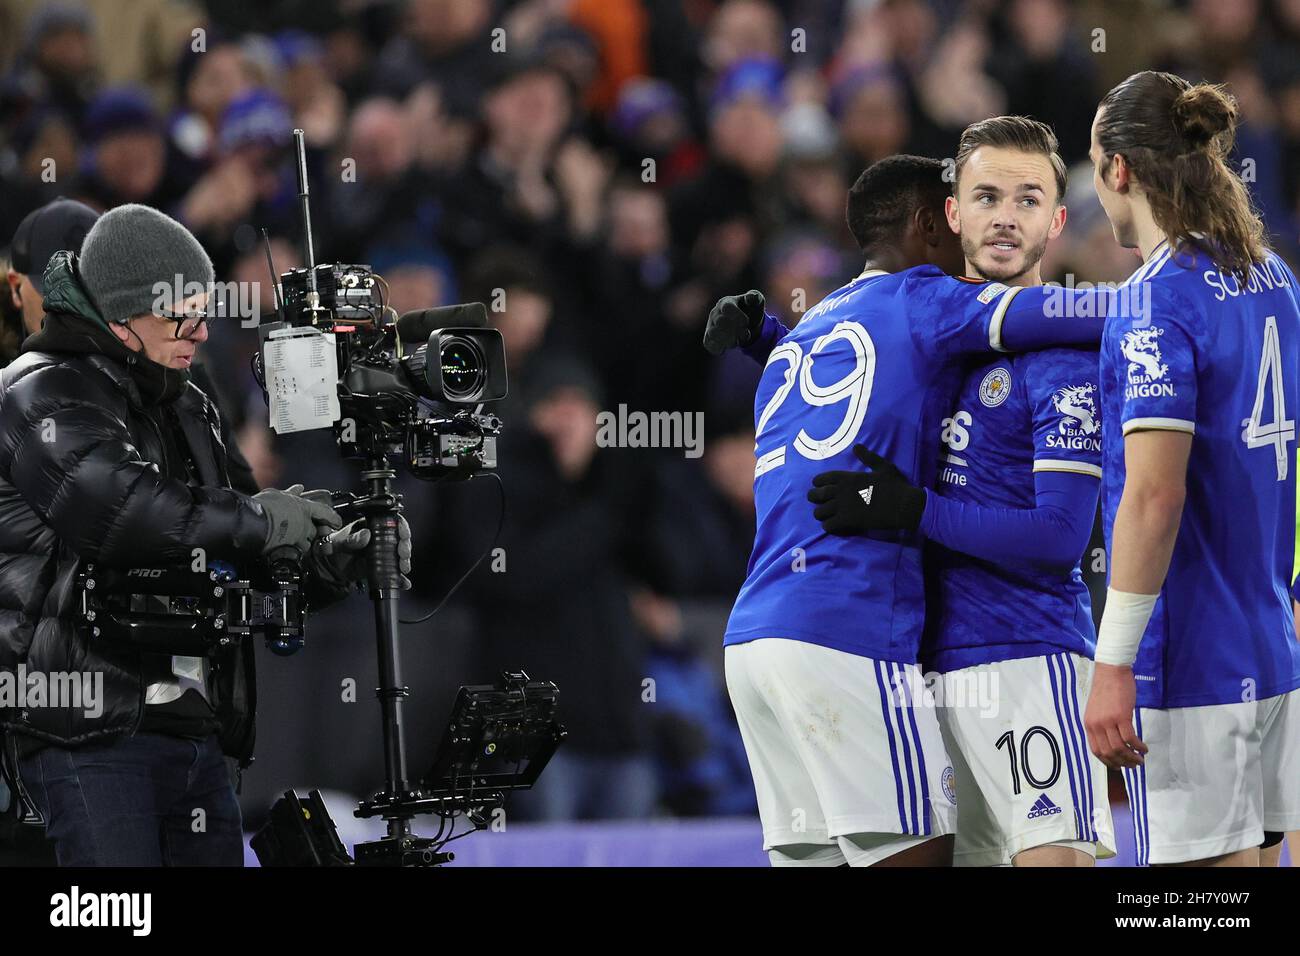 LEICESTER, UK. NOVEMBER 25.James Maddison of Leicester City celebrates with teammates after scoring their sides second goal to make it 2-0 during the UEFA Europa League group C match between Leicester City and Legia Warszawa at the King Power Stadium, Leicester on Thursday 25th November 2021. (Credit: James Holyoak/MB Media) Stock Photo